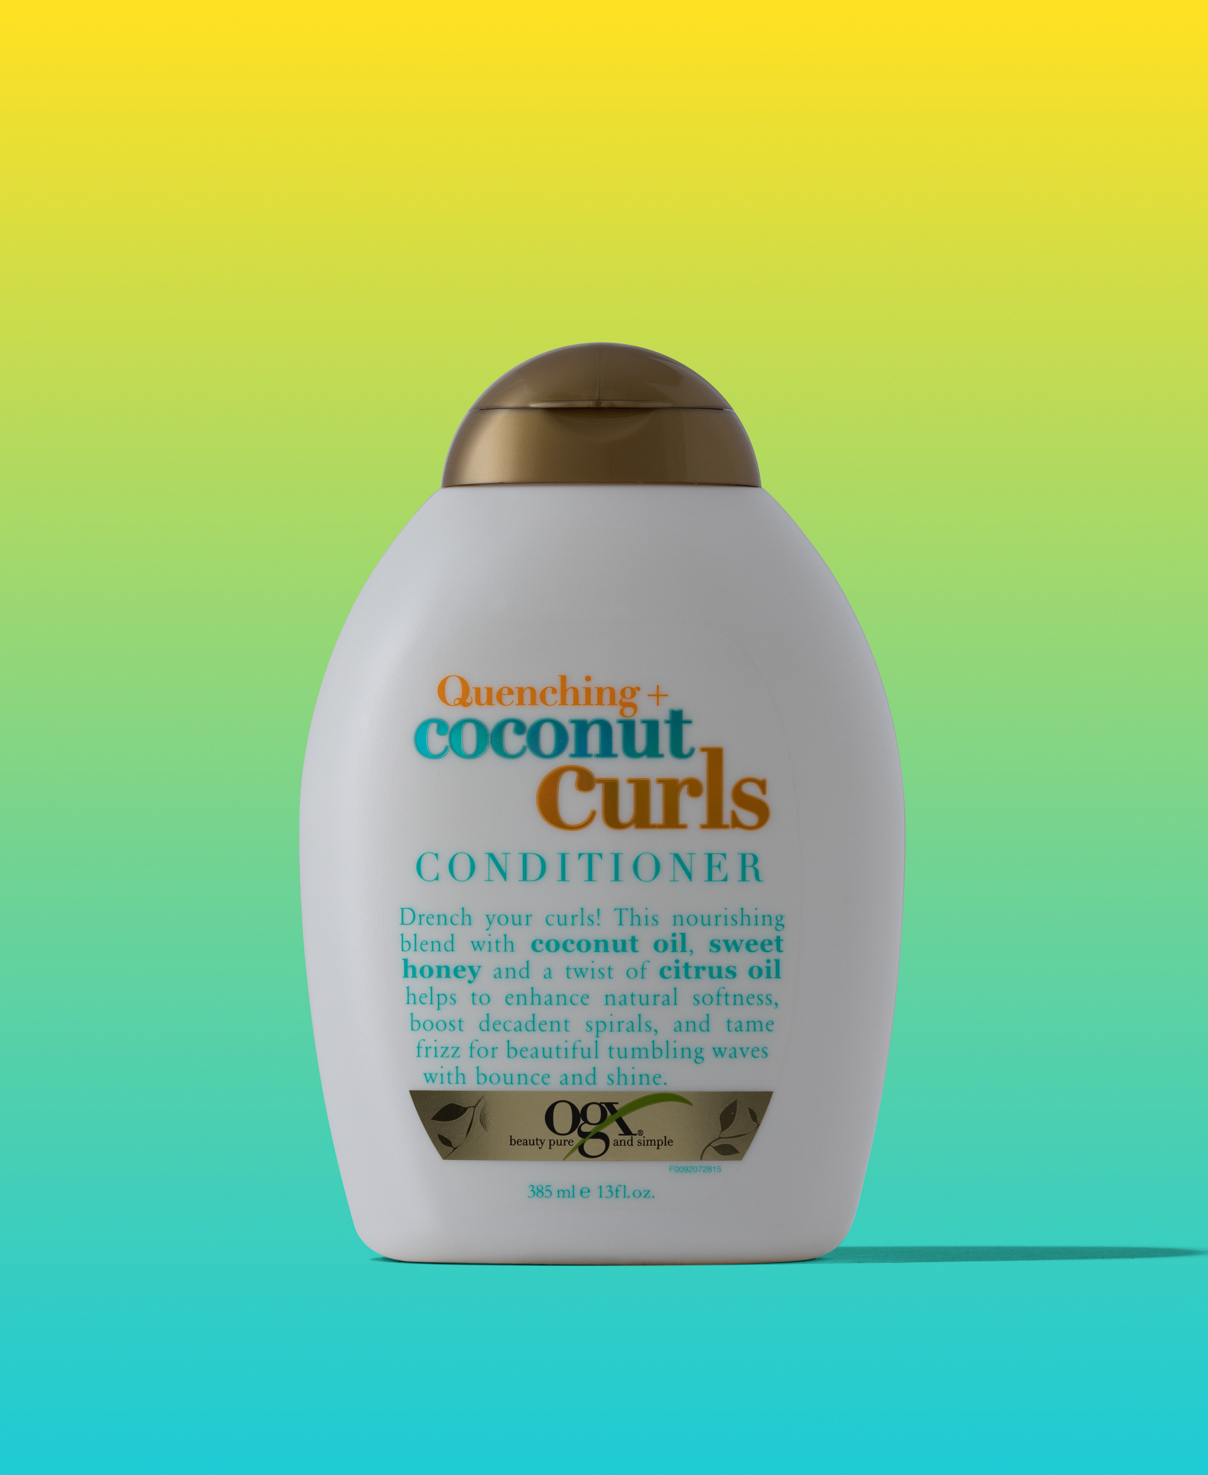 Quenching + Coconut Curls Conditioner 13 fl oz